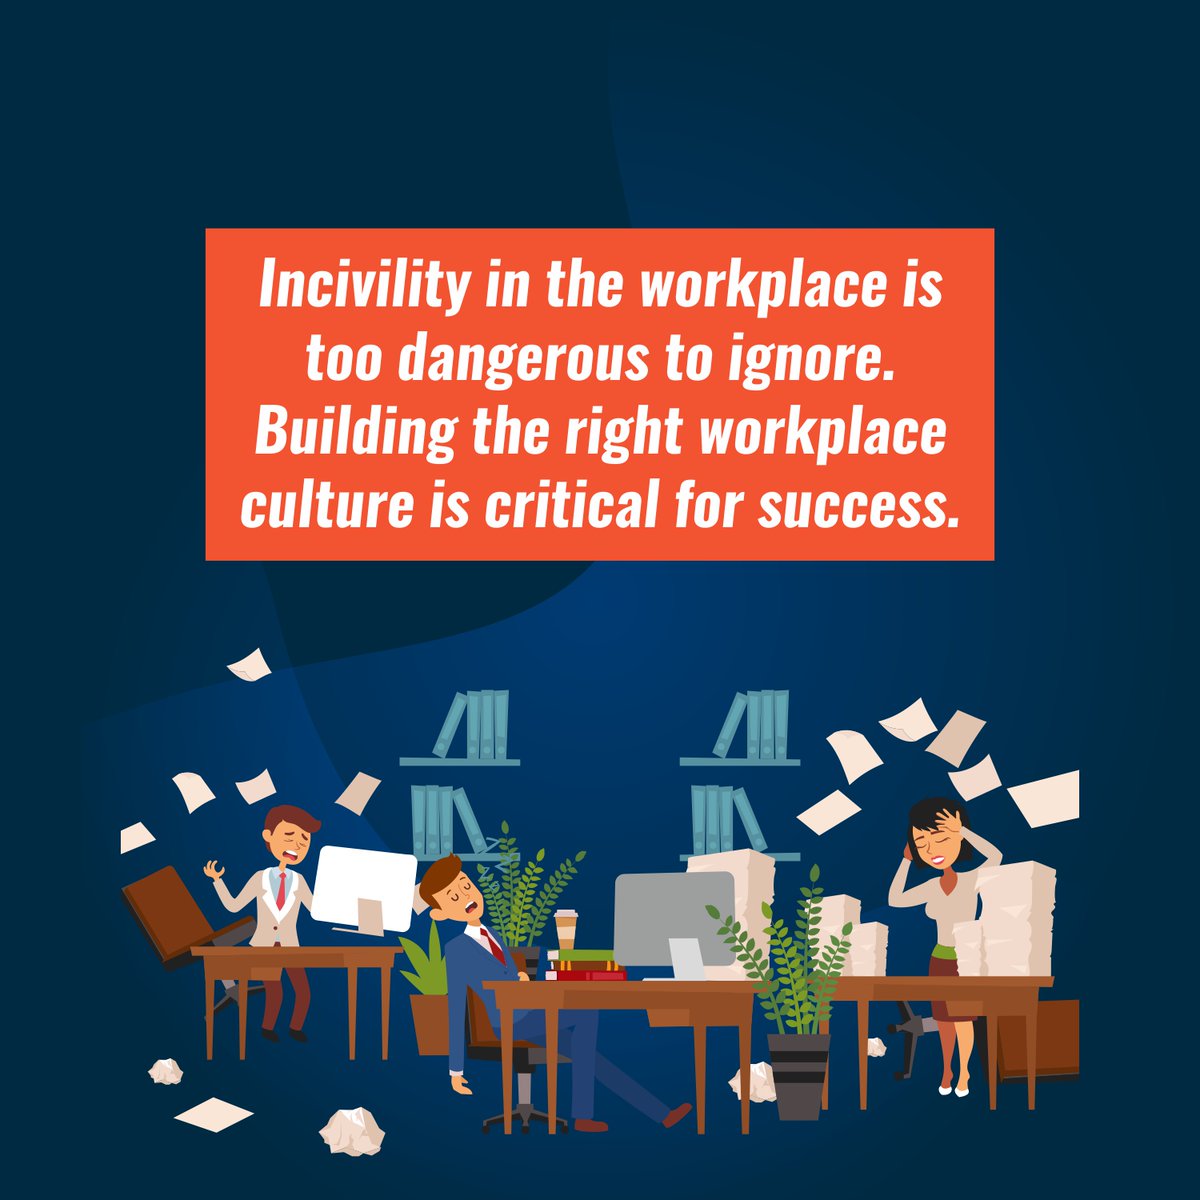 Elevate workplace performance with civility! Combat incivility for higher productivity and morale. Lead by example, listen to feedback, and acknowledge stellar performance. Let's cultivate a respectful workplace!

#InfiniteSolutions #WorkplaceCulture #CivilityMatters 🌟🤝